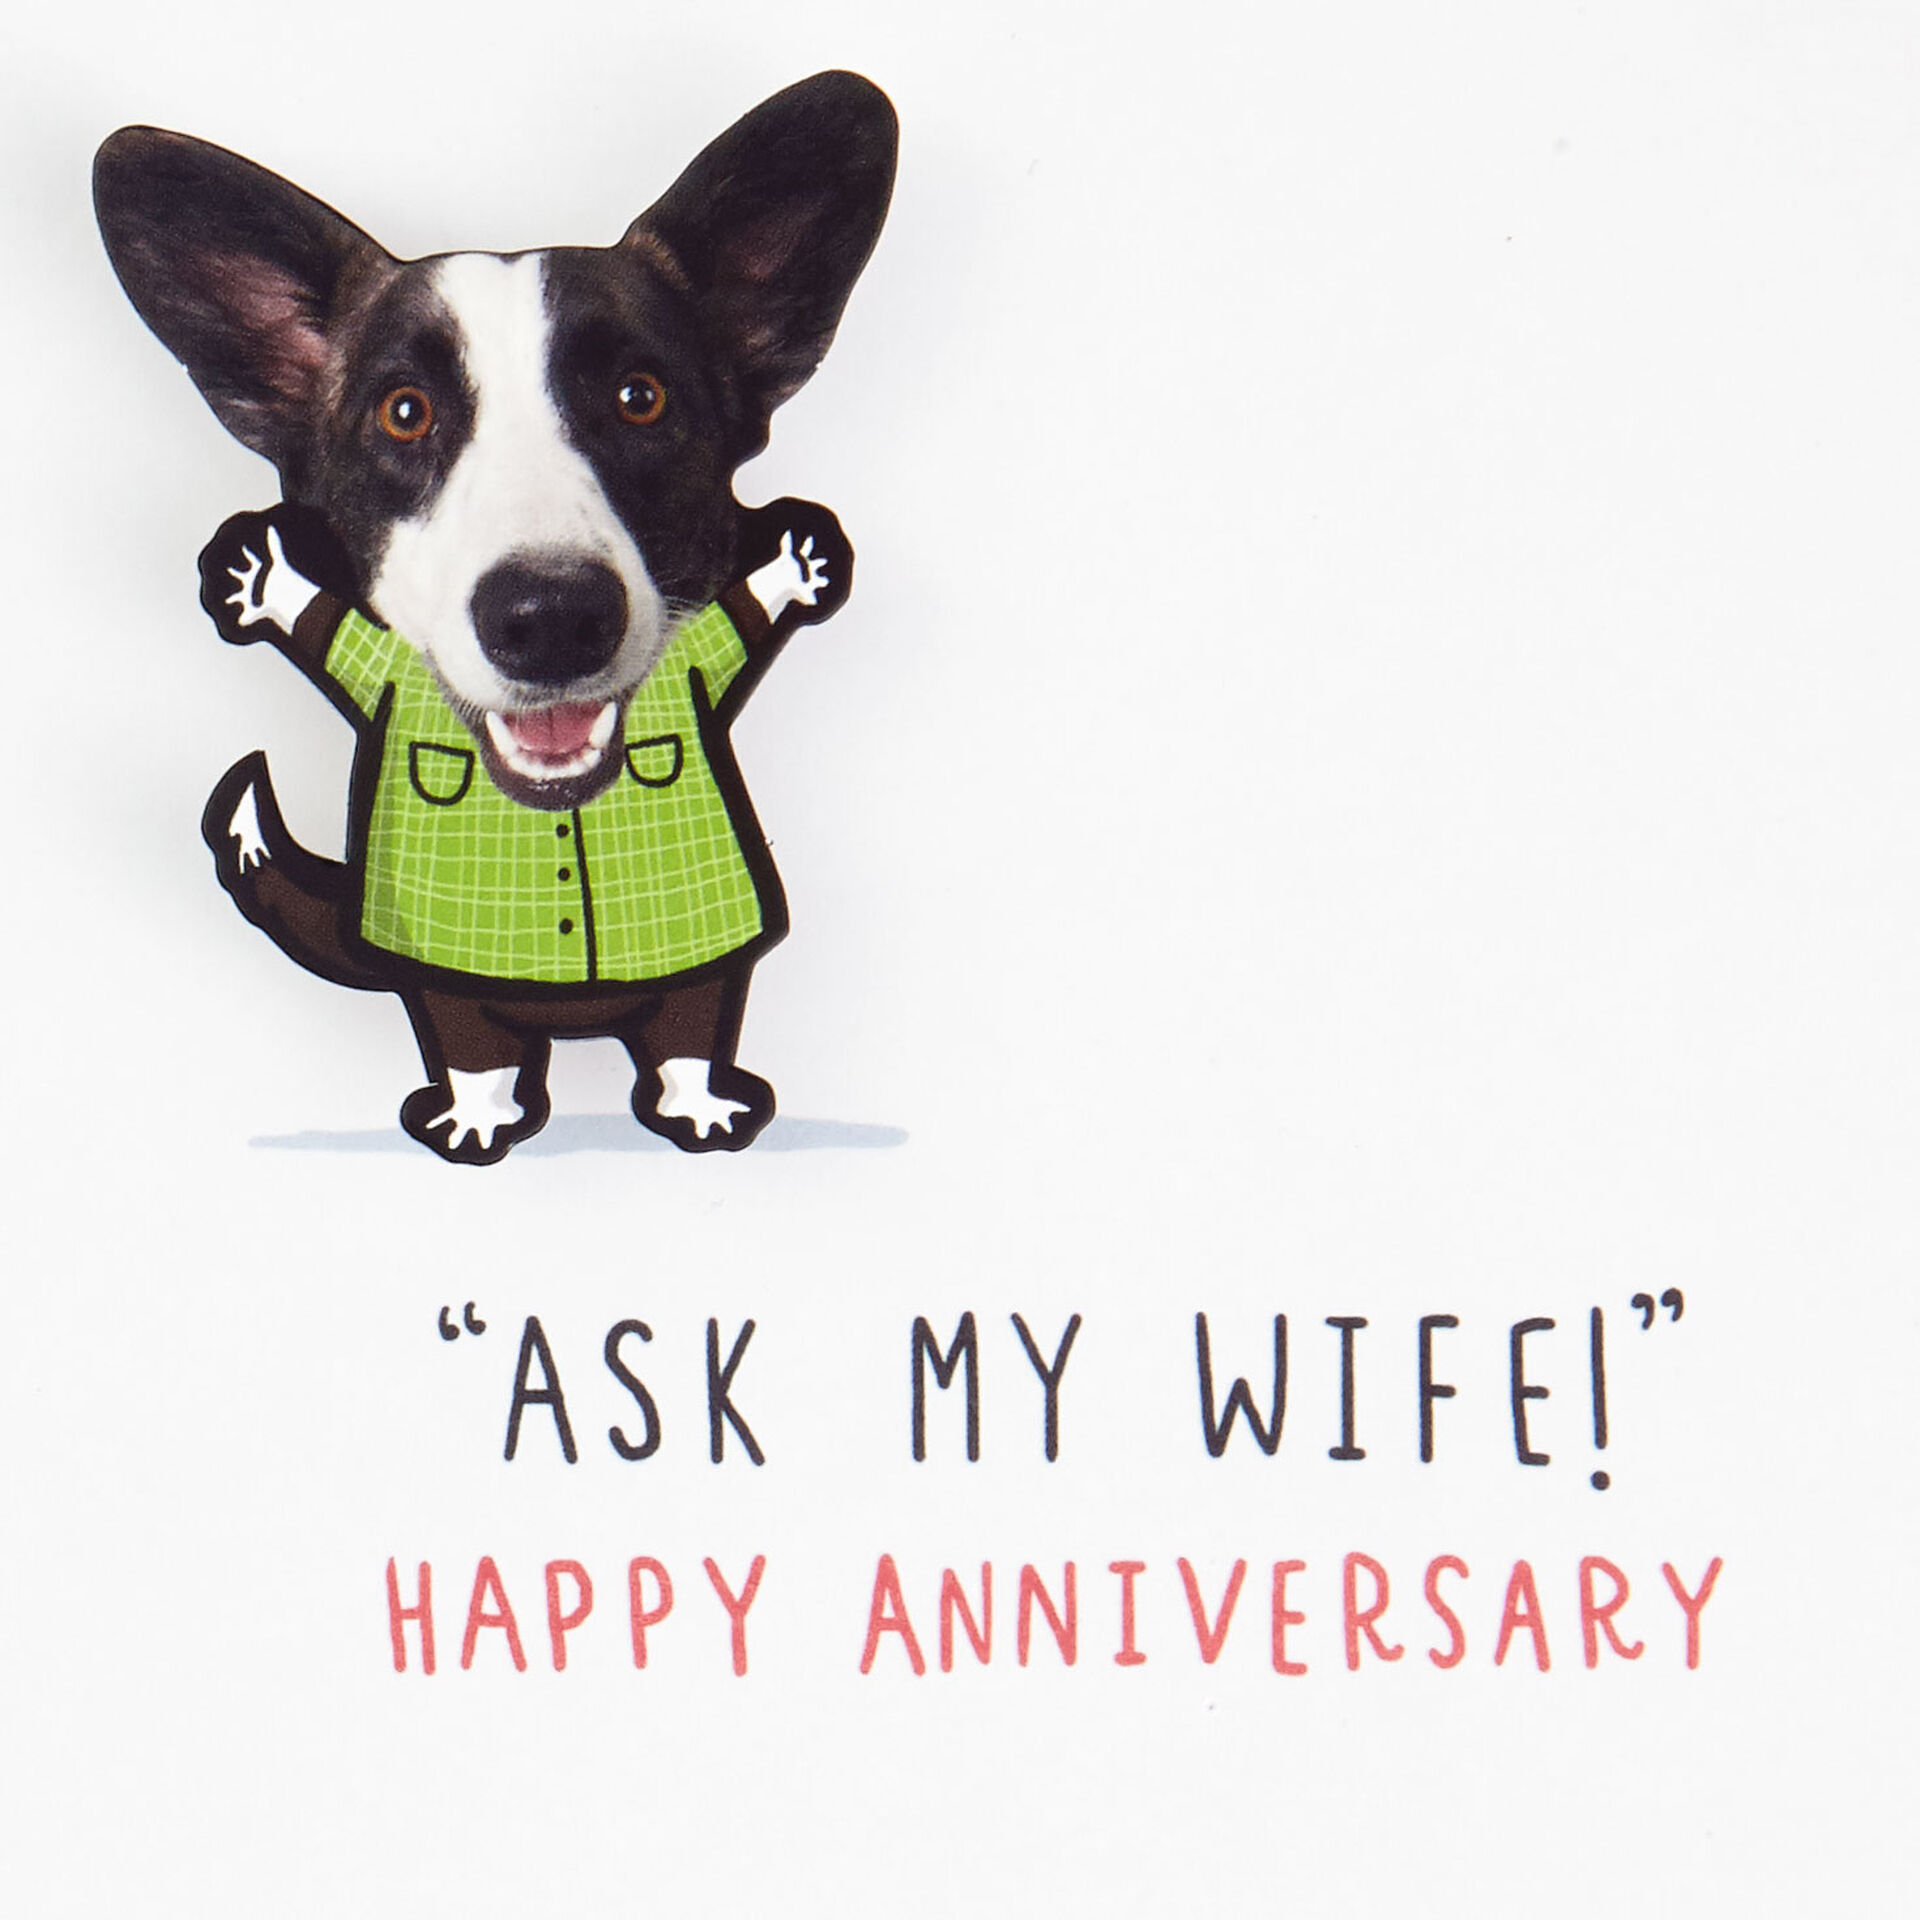 Dog-&-Word-Balloon-Funny-Anniversary-Card-for-Wife_399AVY2926_02